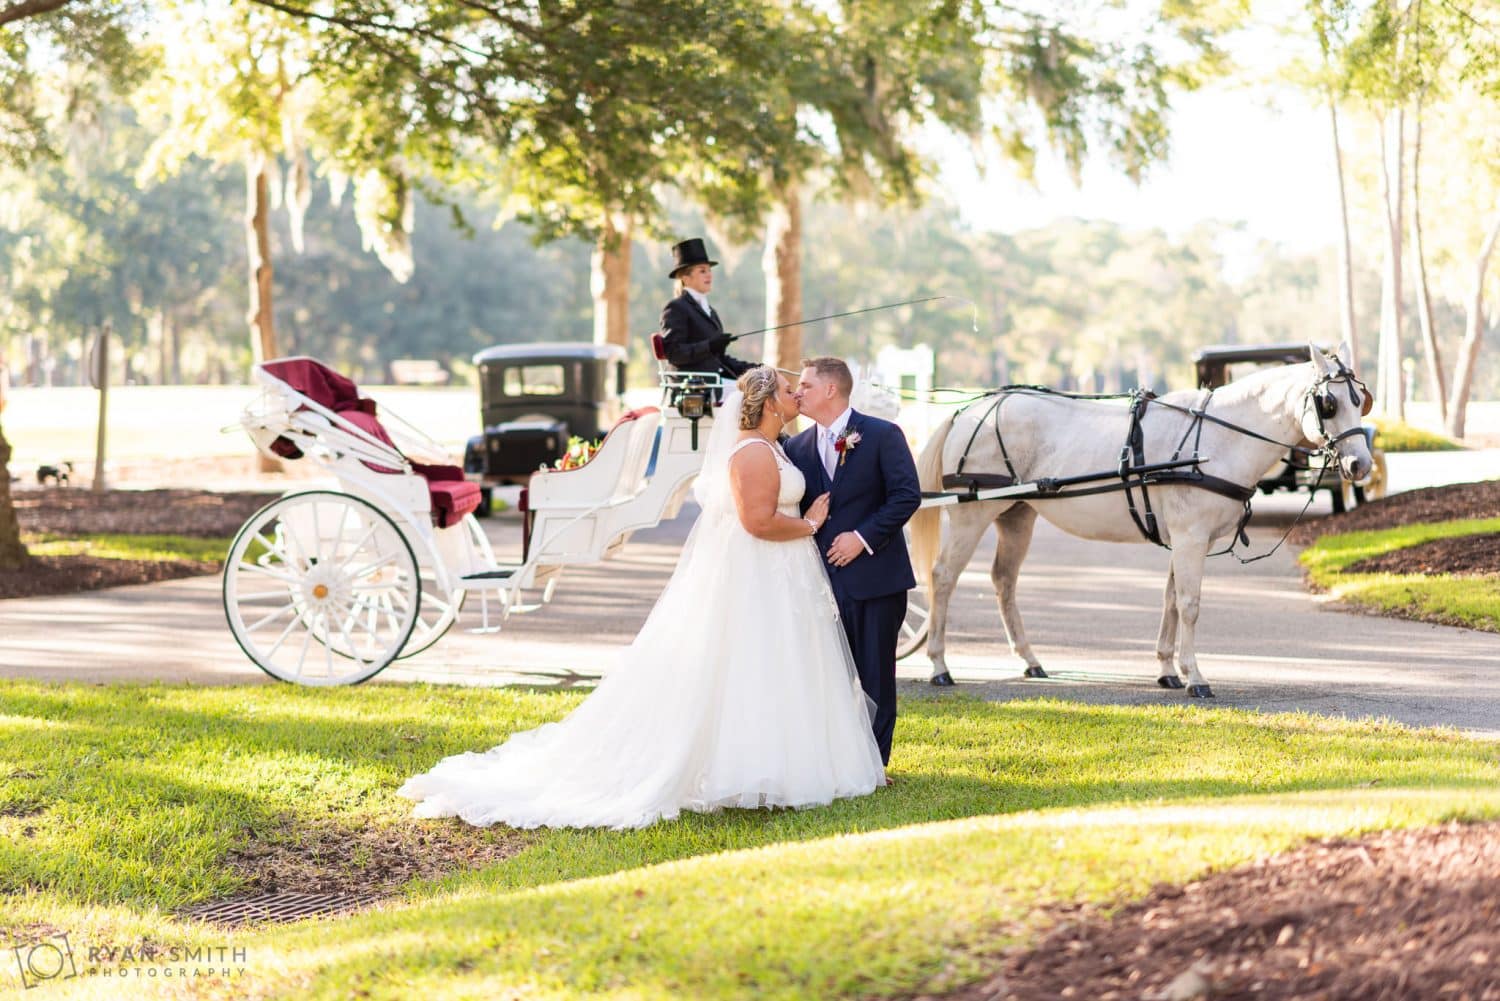 Kiss in front of the horse drawn carriage